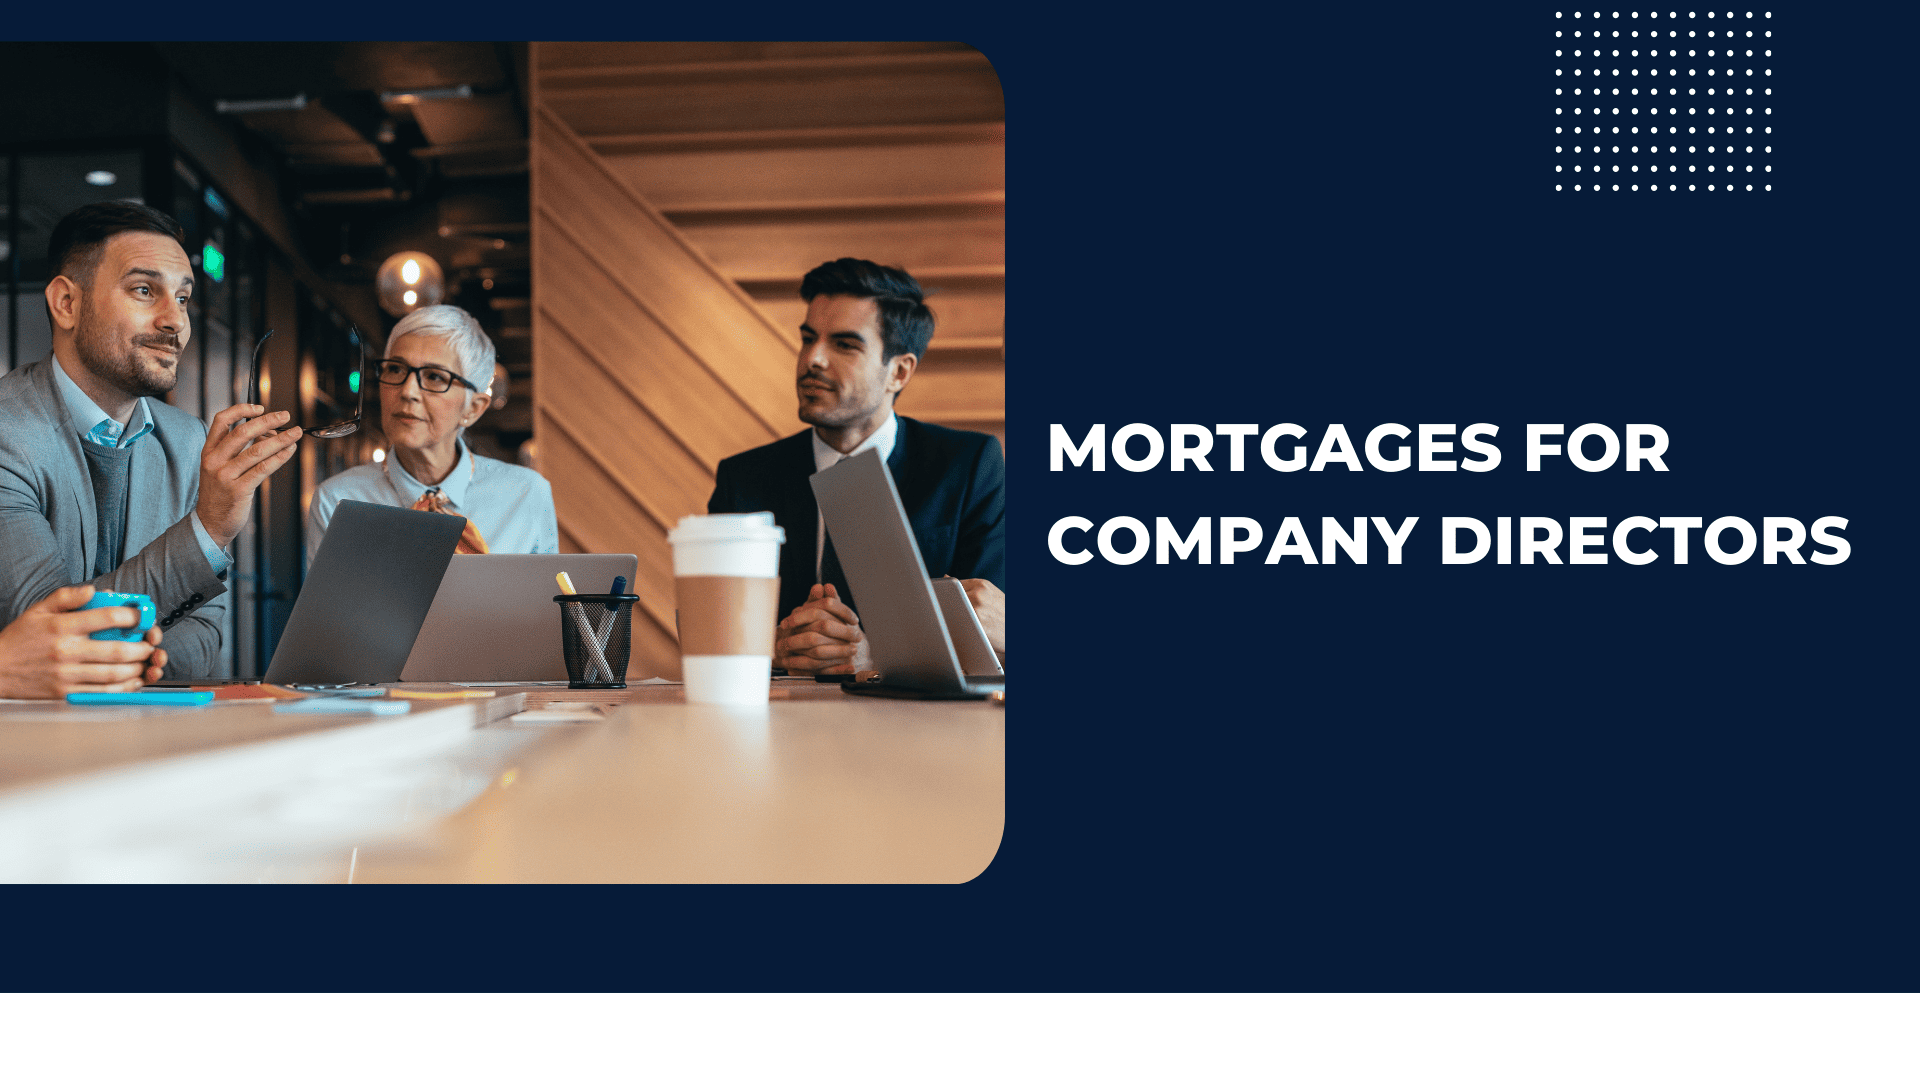 Mortgages For Company Directors